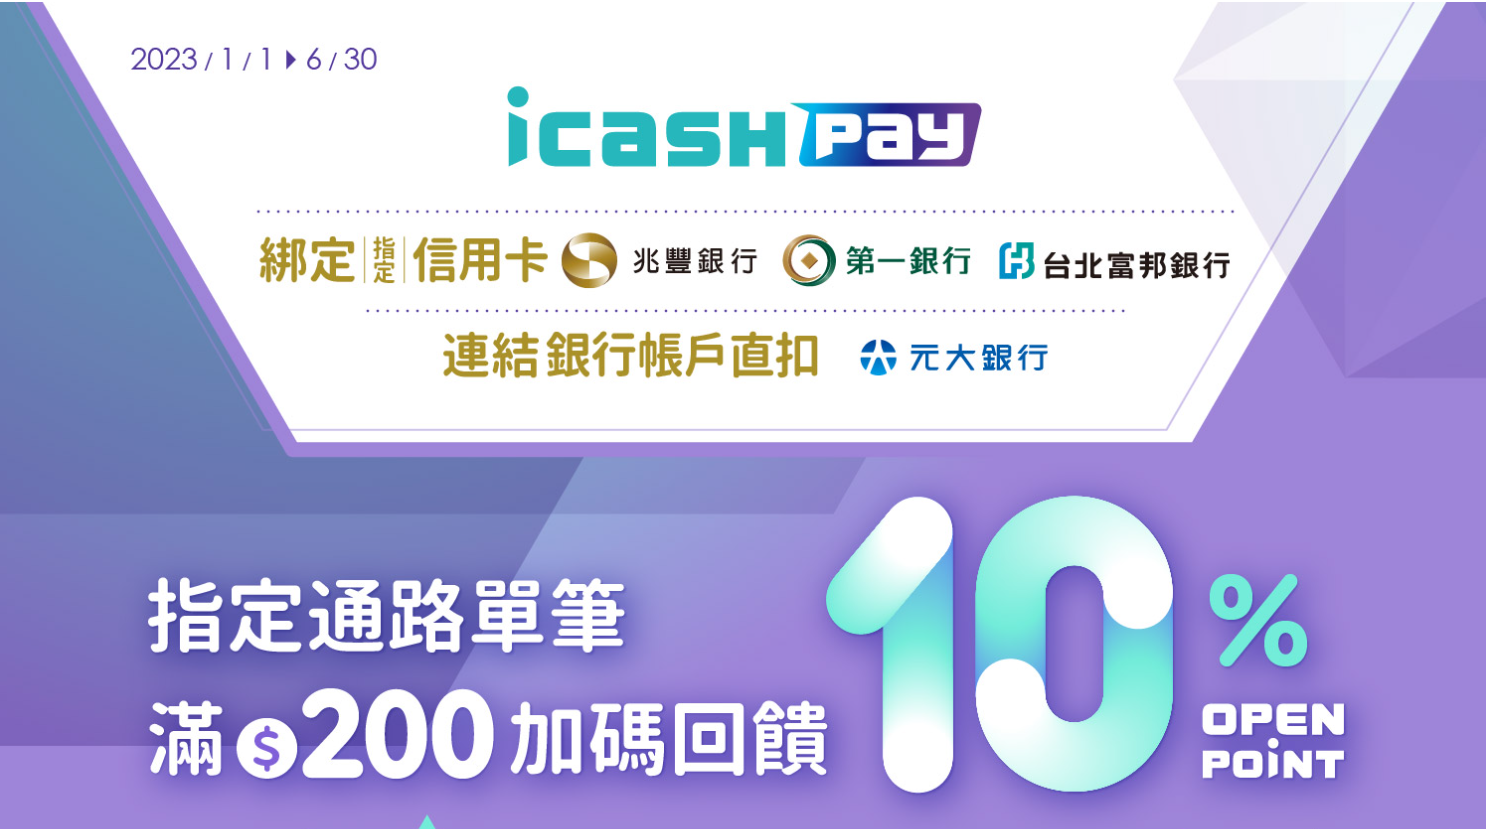 icash pay 10%回饋